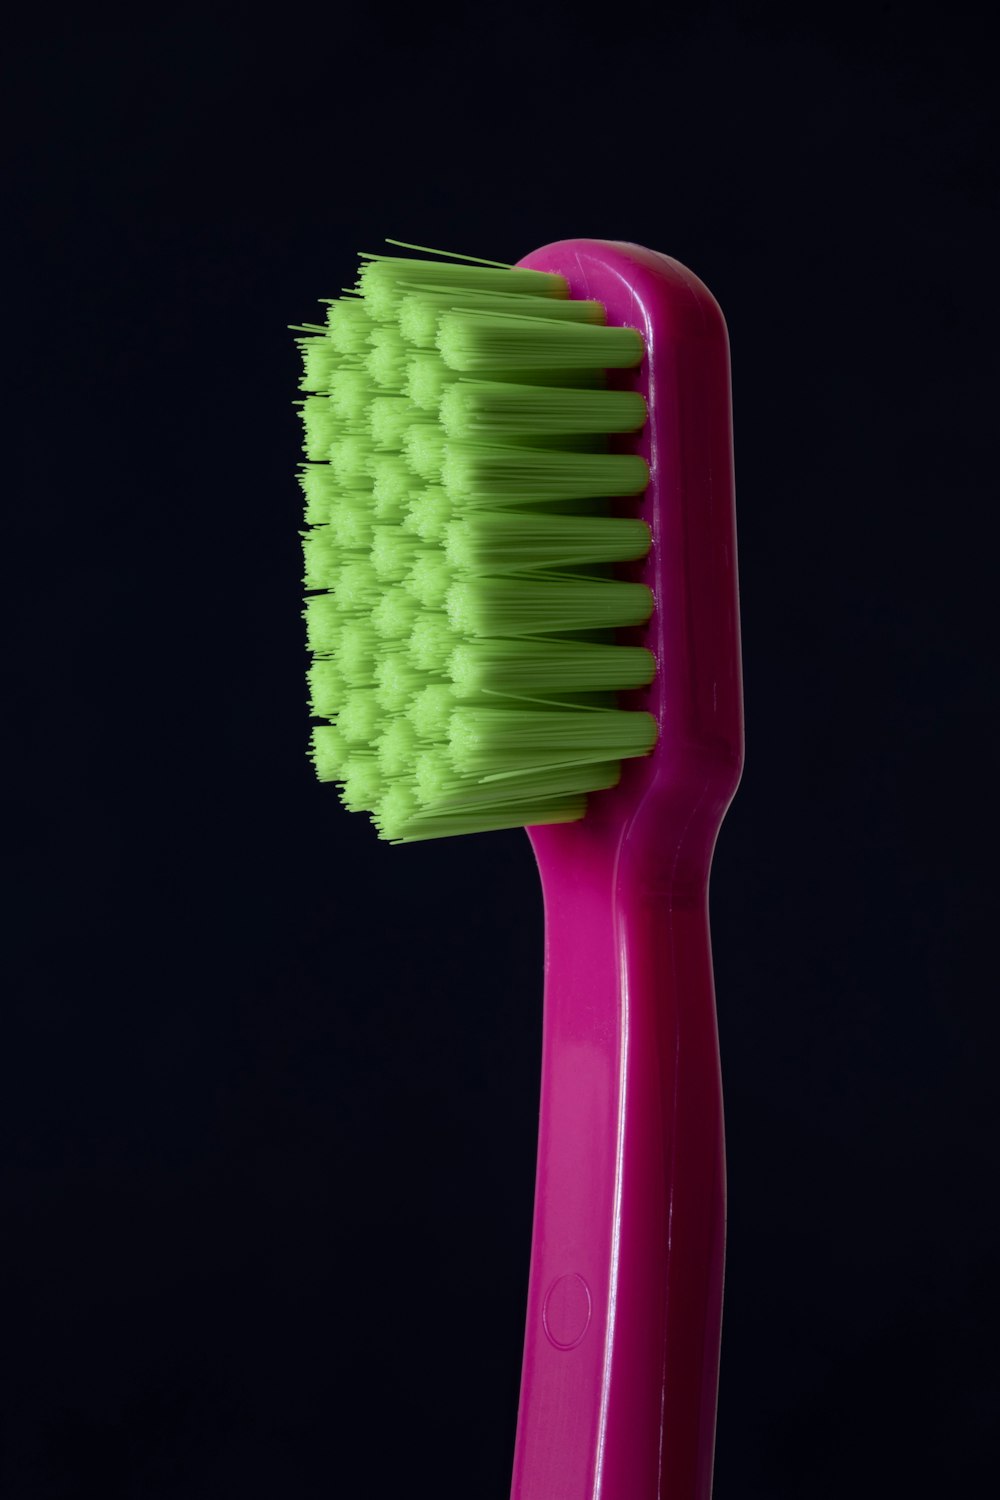 closeup photo of purple and green toothbrush